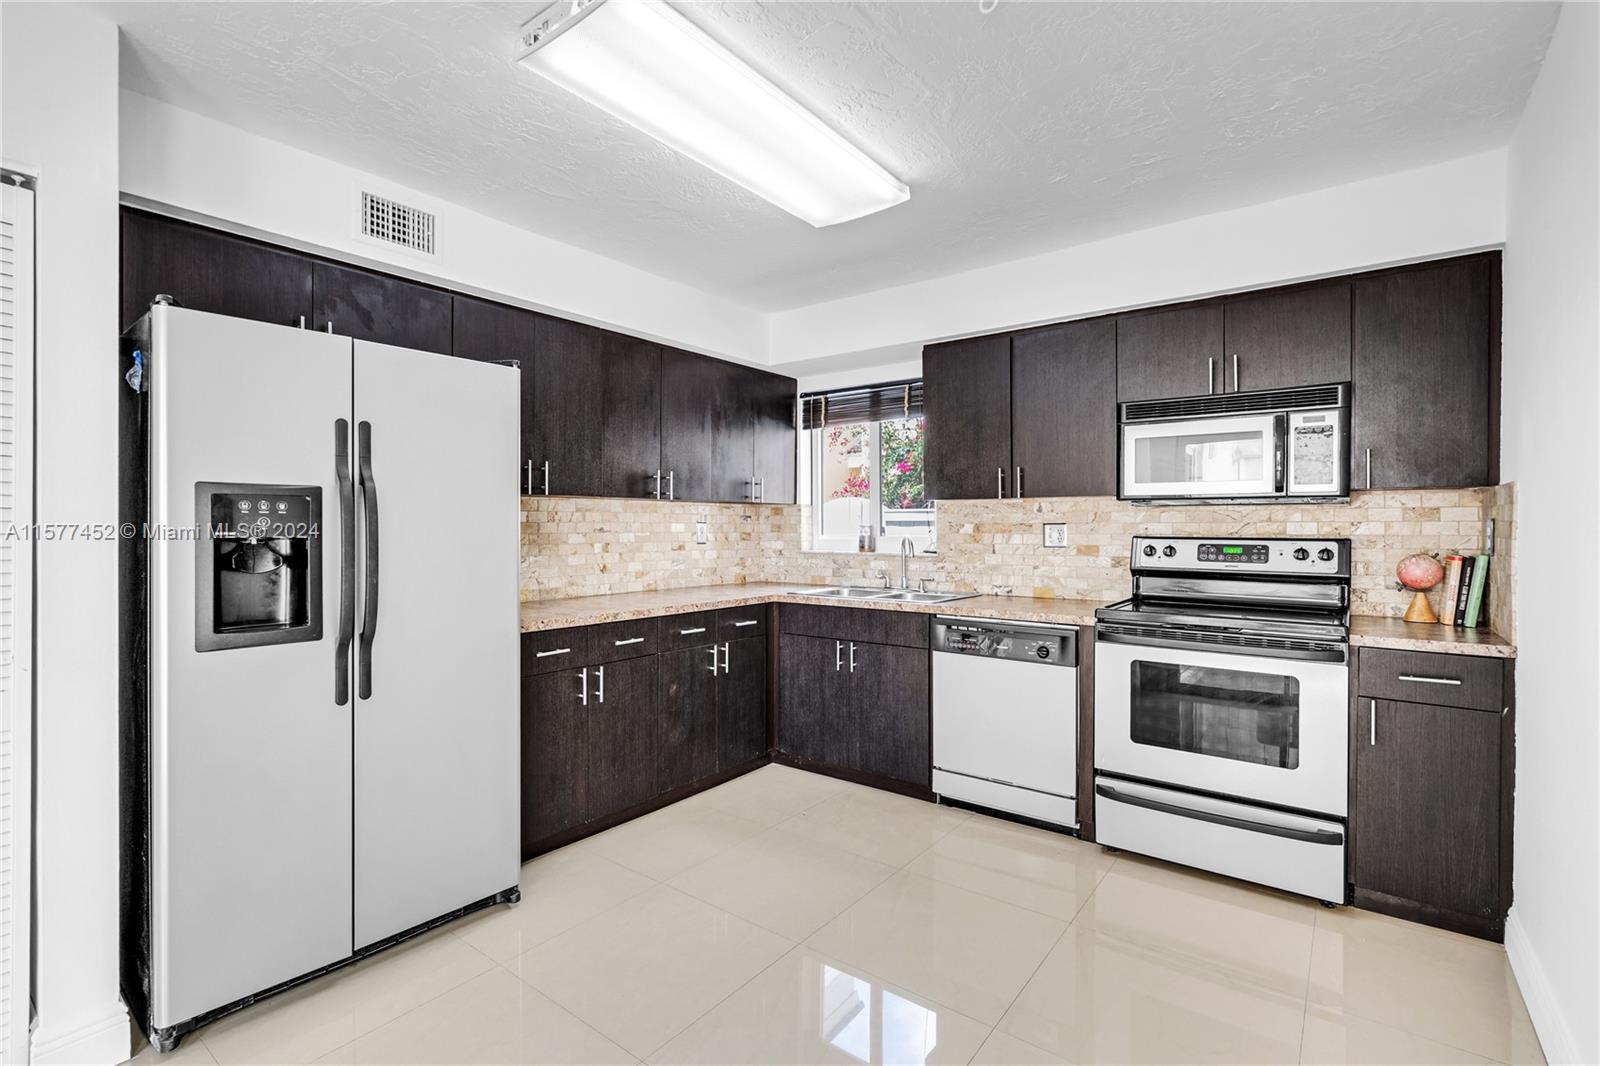 a kitchen with stainless steel appliances granite countertop a refrigerator stove a sink and dishwasher